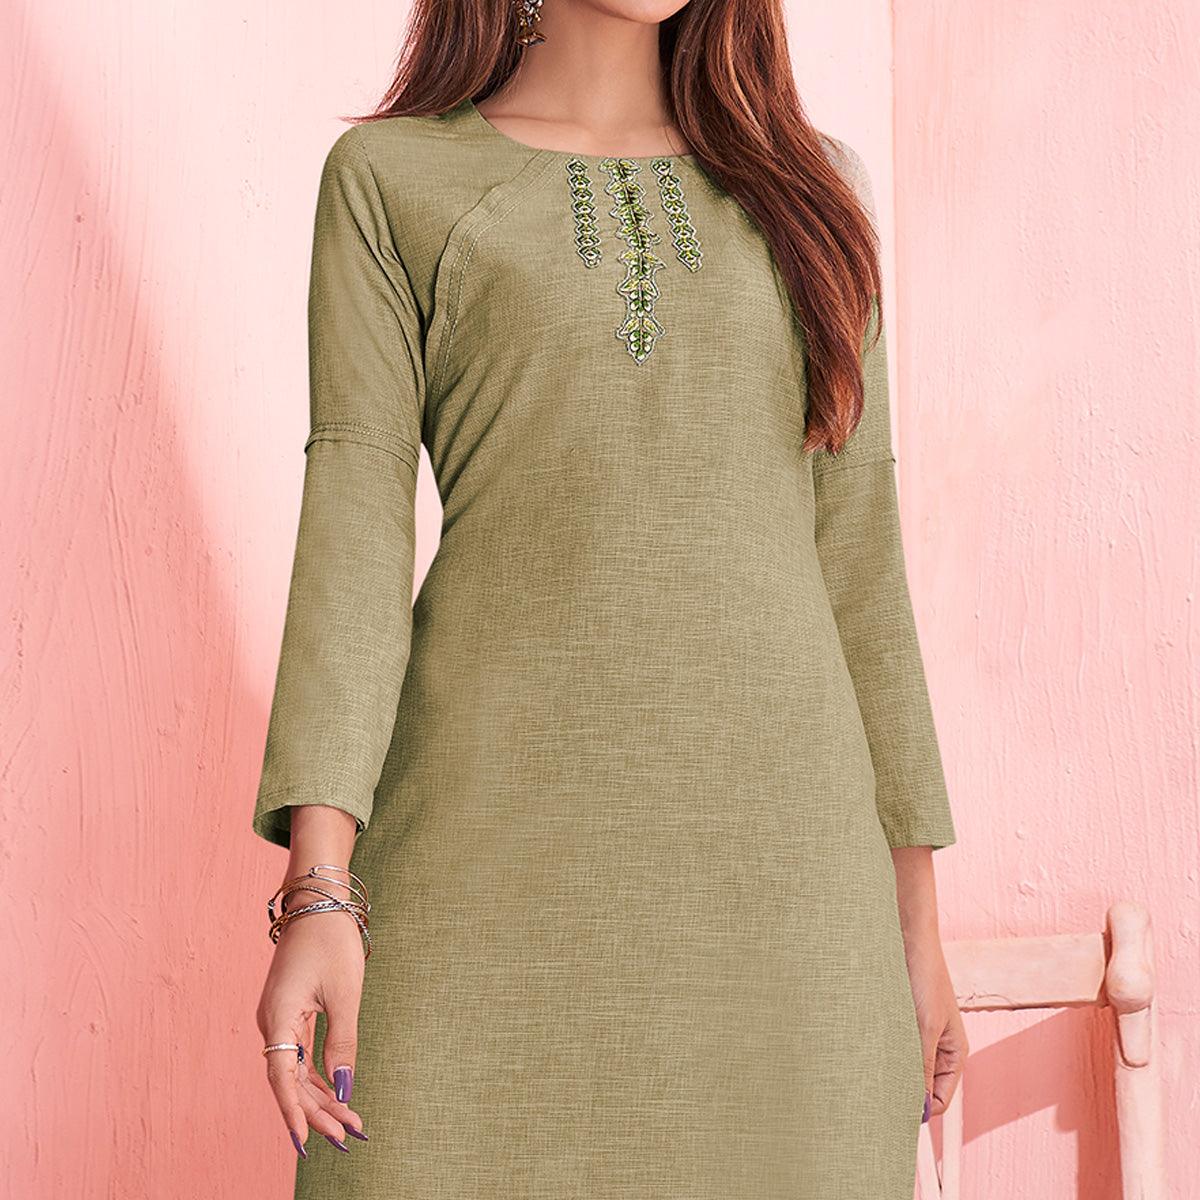 Charming Pastel Olive Green Colored Partywear Embroidered Rayon Kurti-Palazzo Set - Peachmode